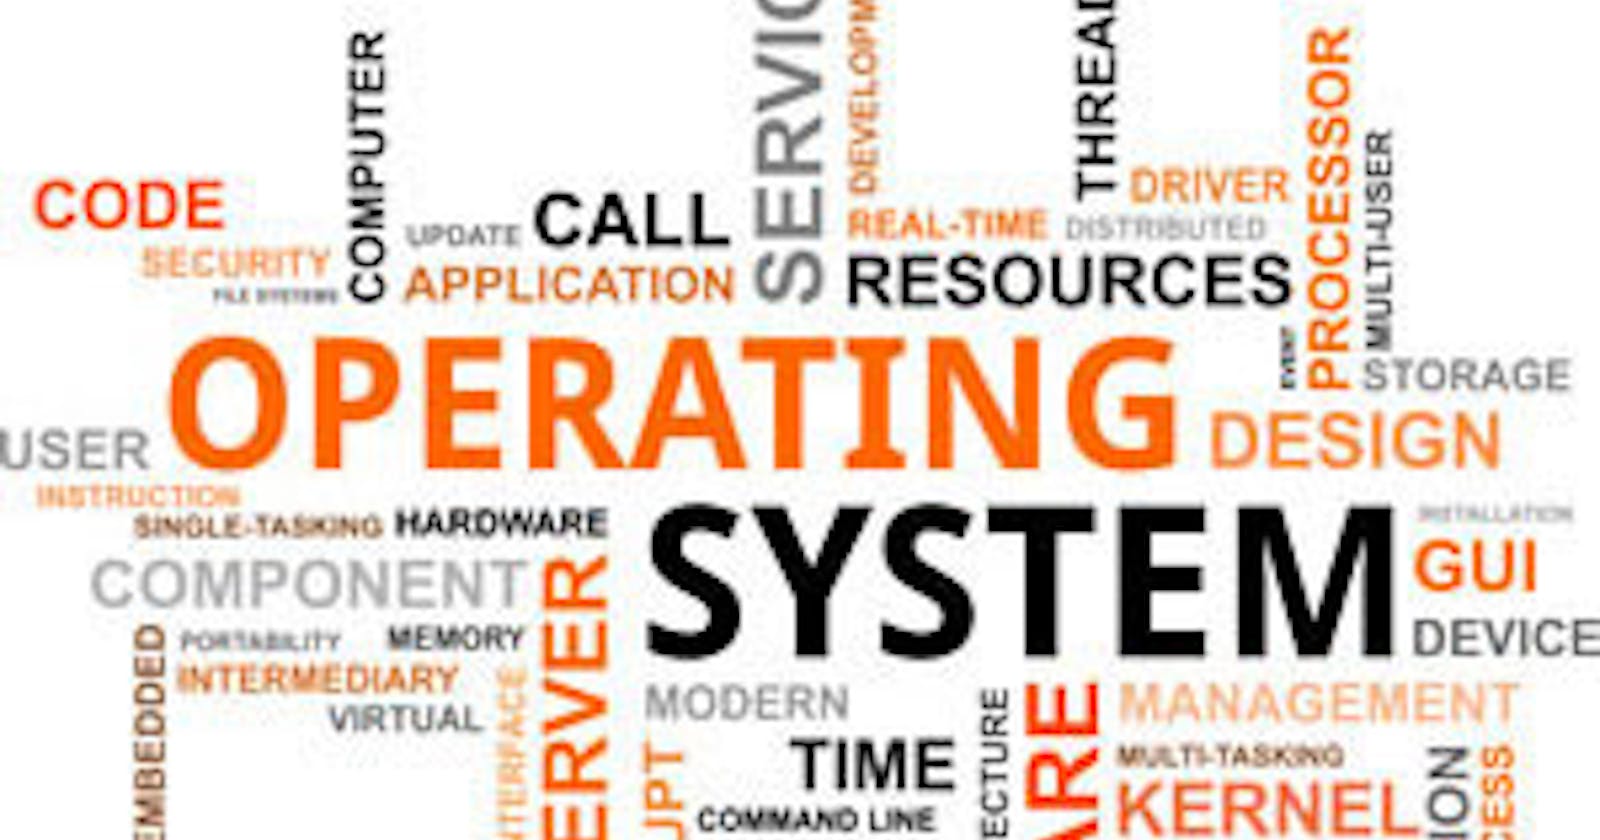 Real-Time, Distributed, Clustered, and Embedded Operating System |  Operating System - EP04